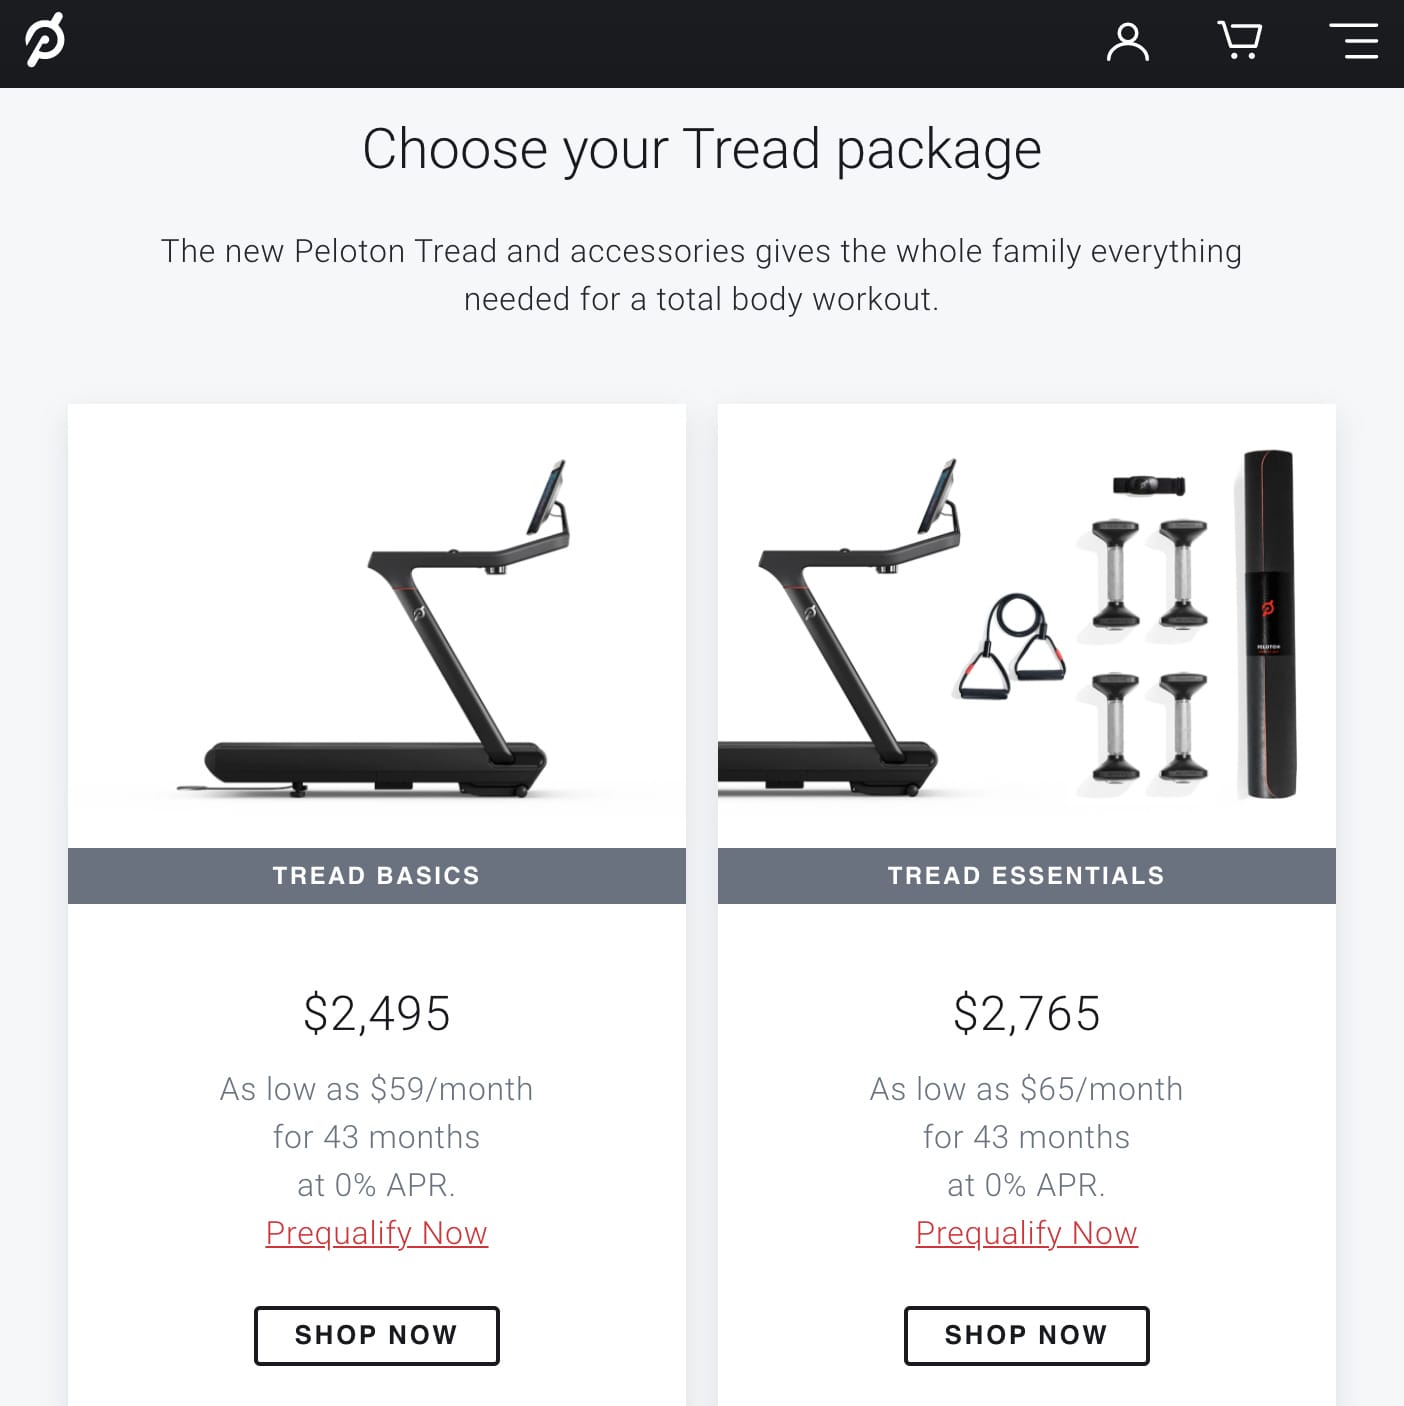 The Peloton Tread is available for purchase again.